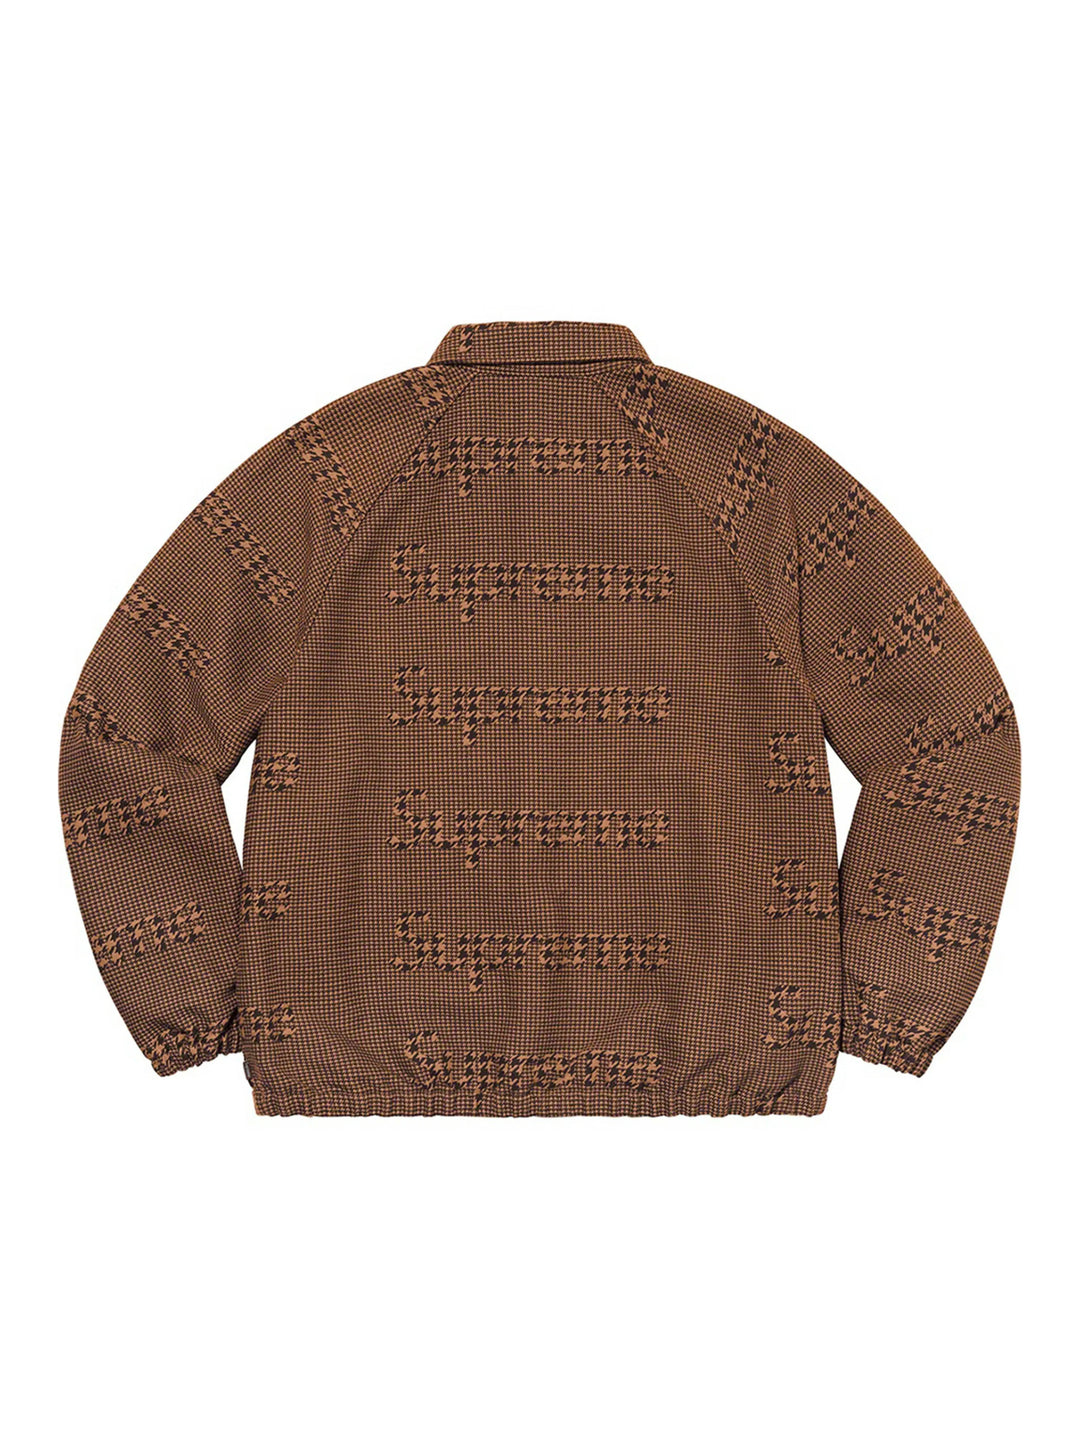 Supreme Houndstooth Logos Snap Front Jacket Brown [FW20] Prior